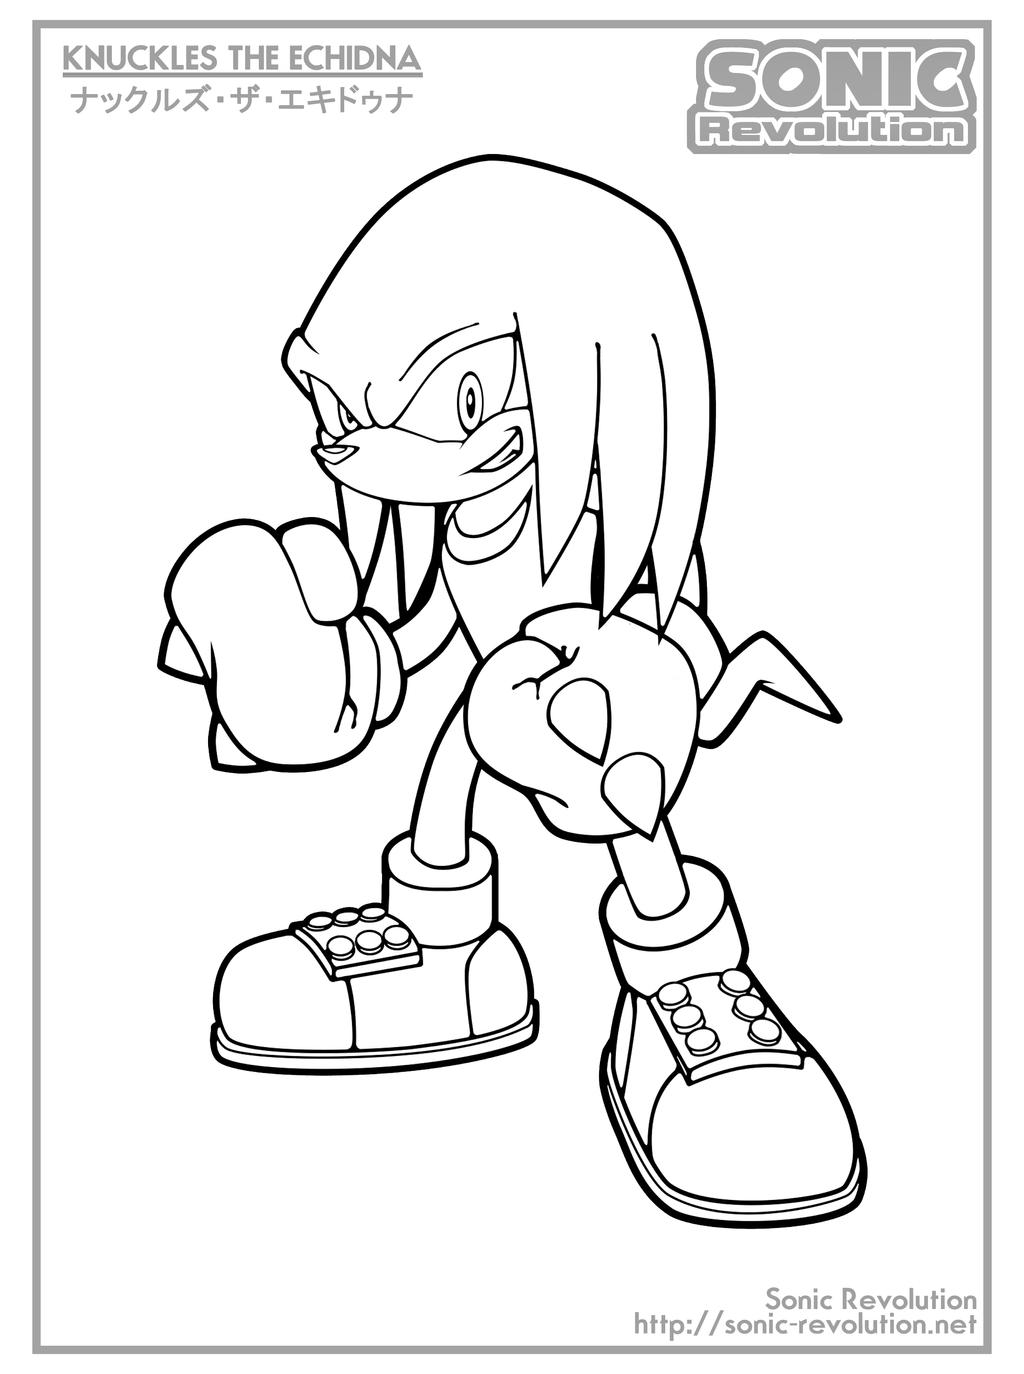 Knuckles colouring page by tentenswift on